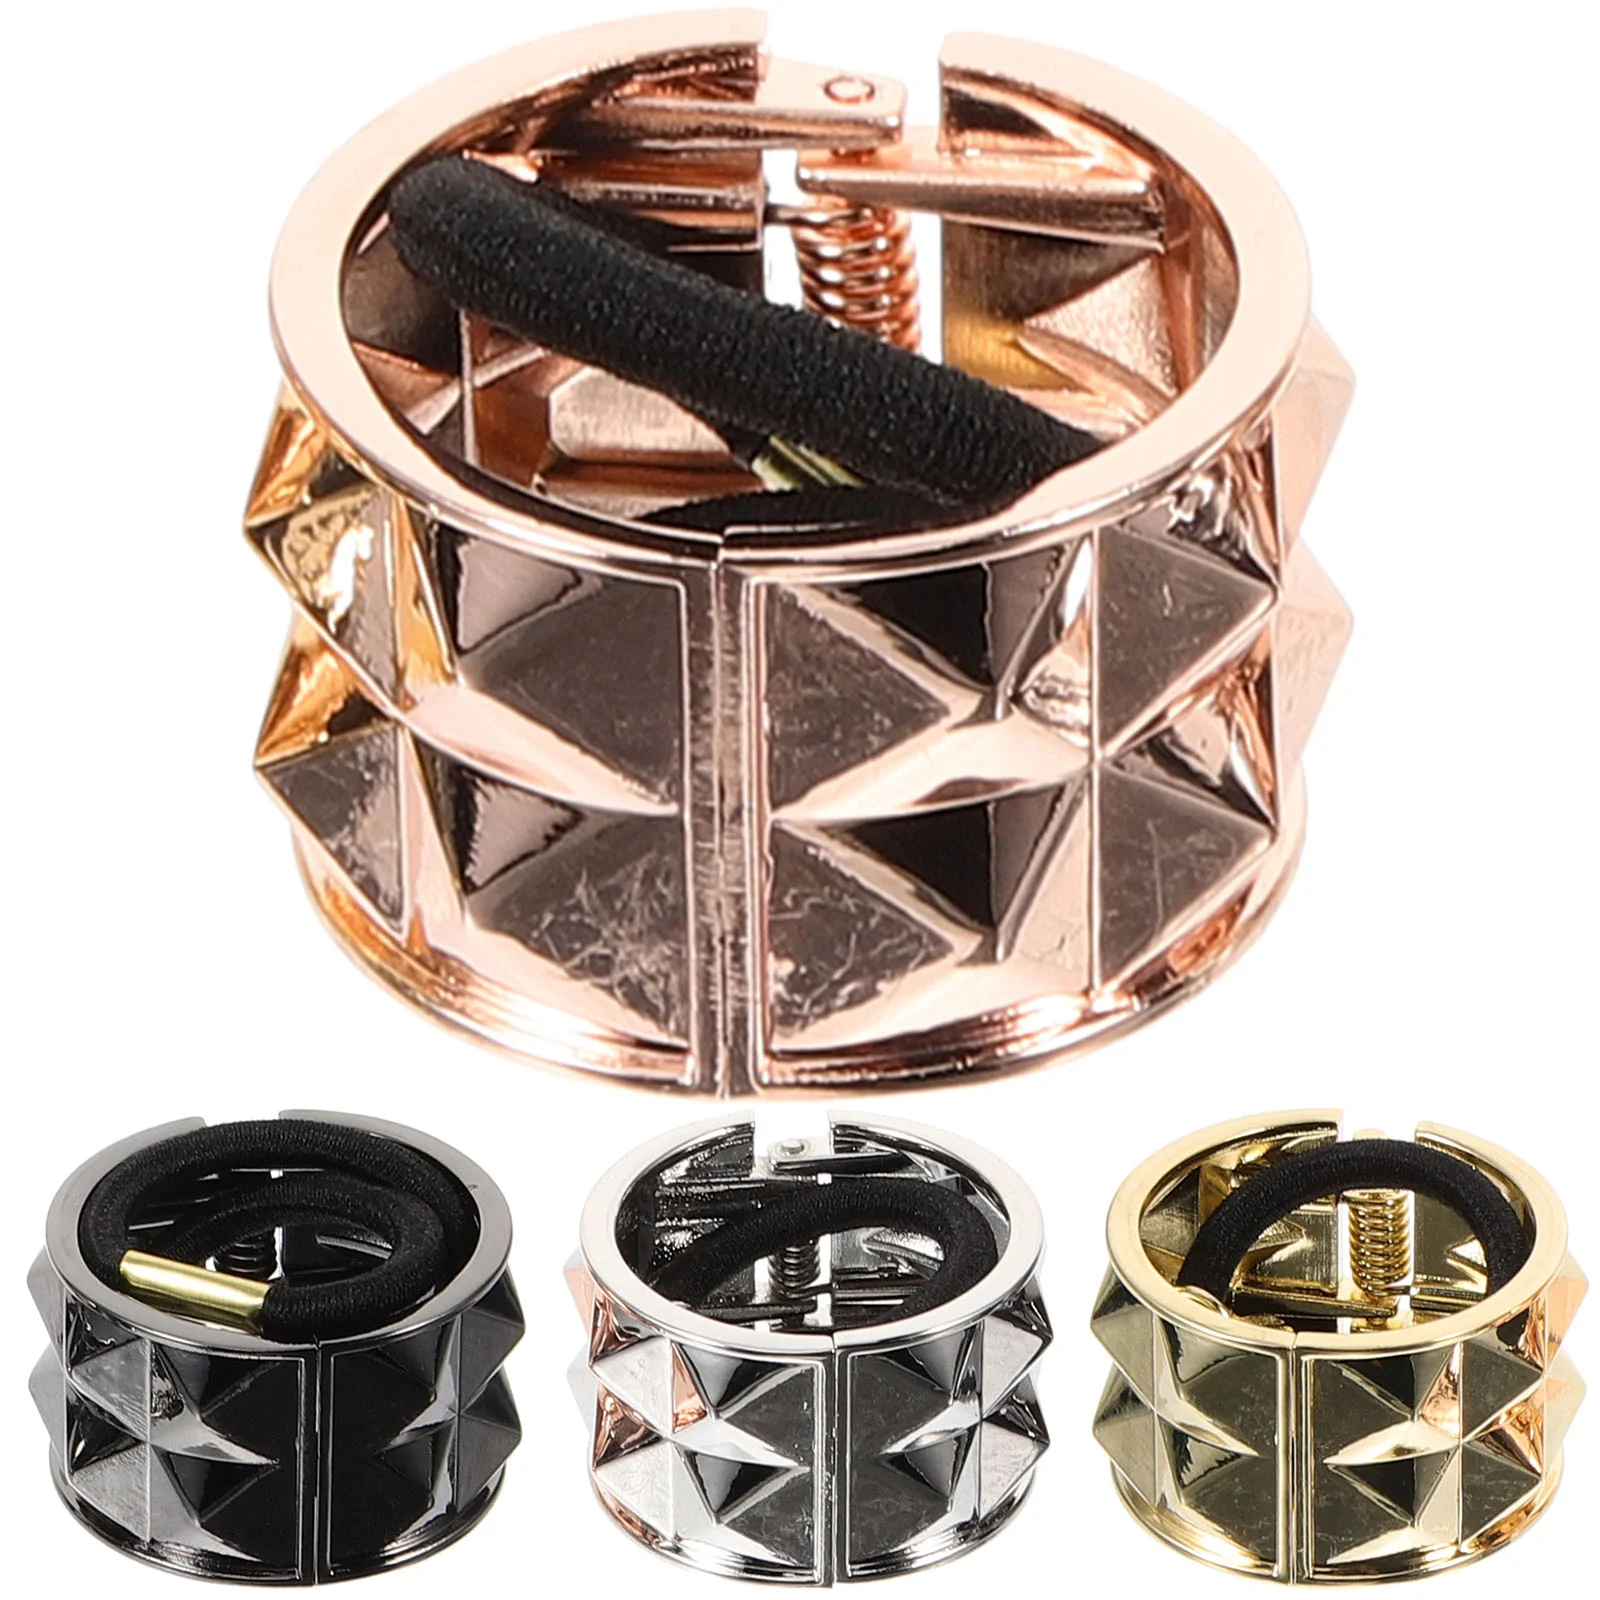 

4 Pcs Hair Ties Women Ponytail Holders Gold Accessories Alloy Metal Wrap Fabric Cuffs Women's